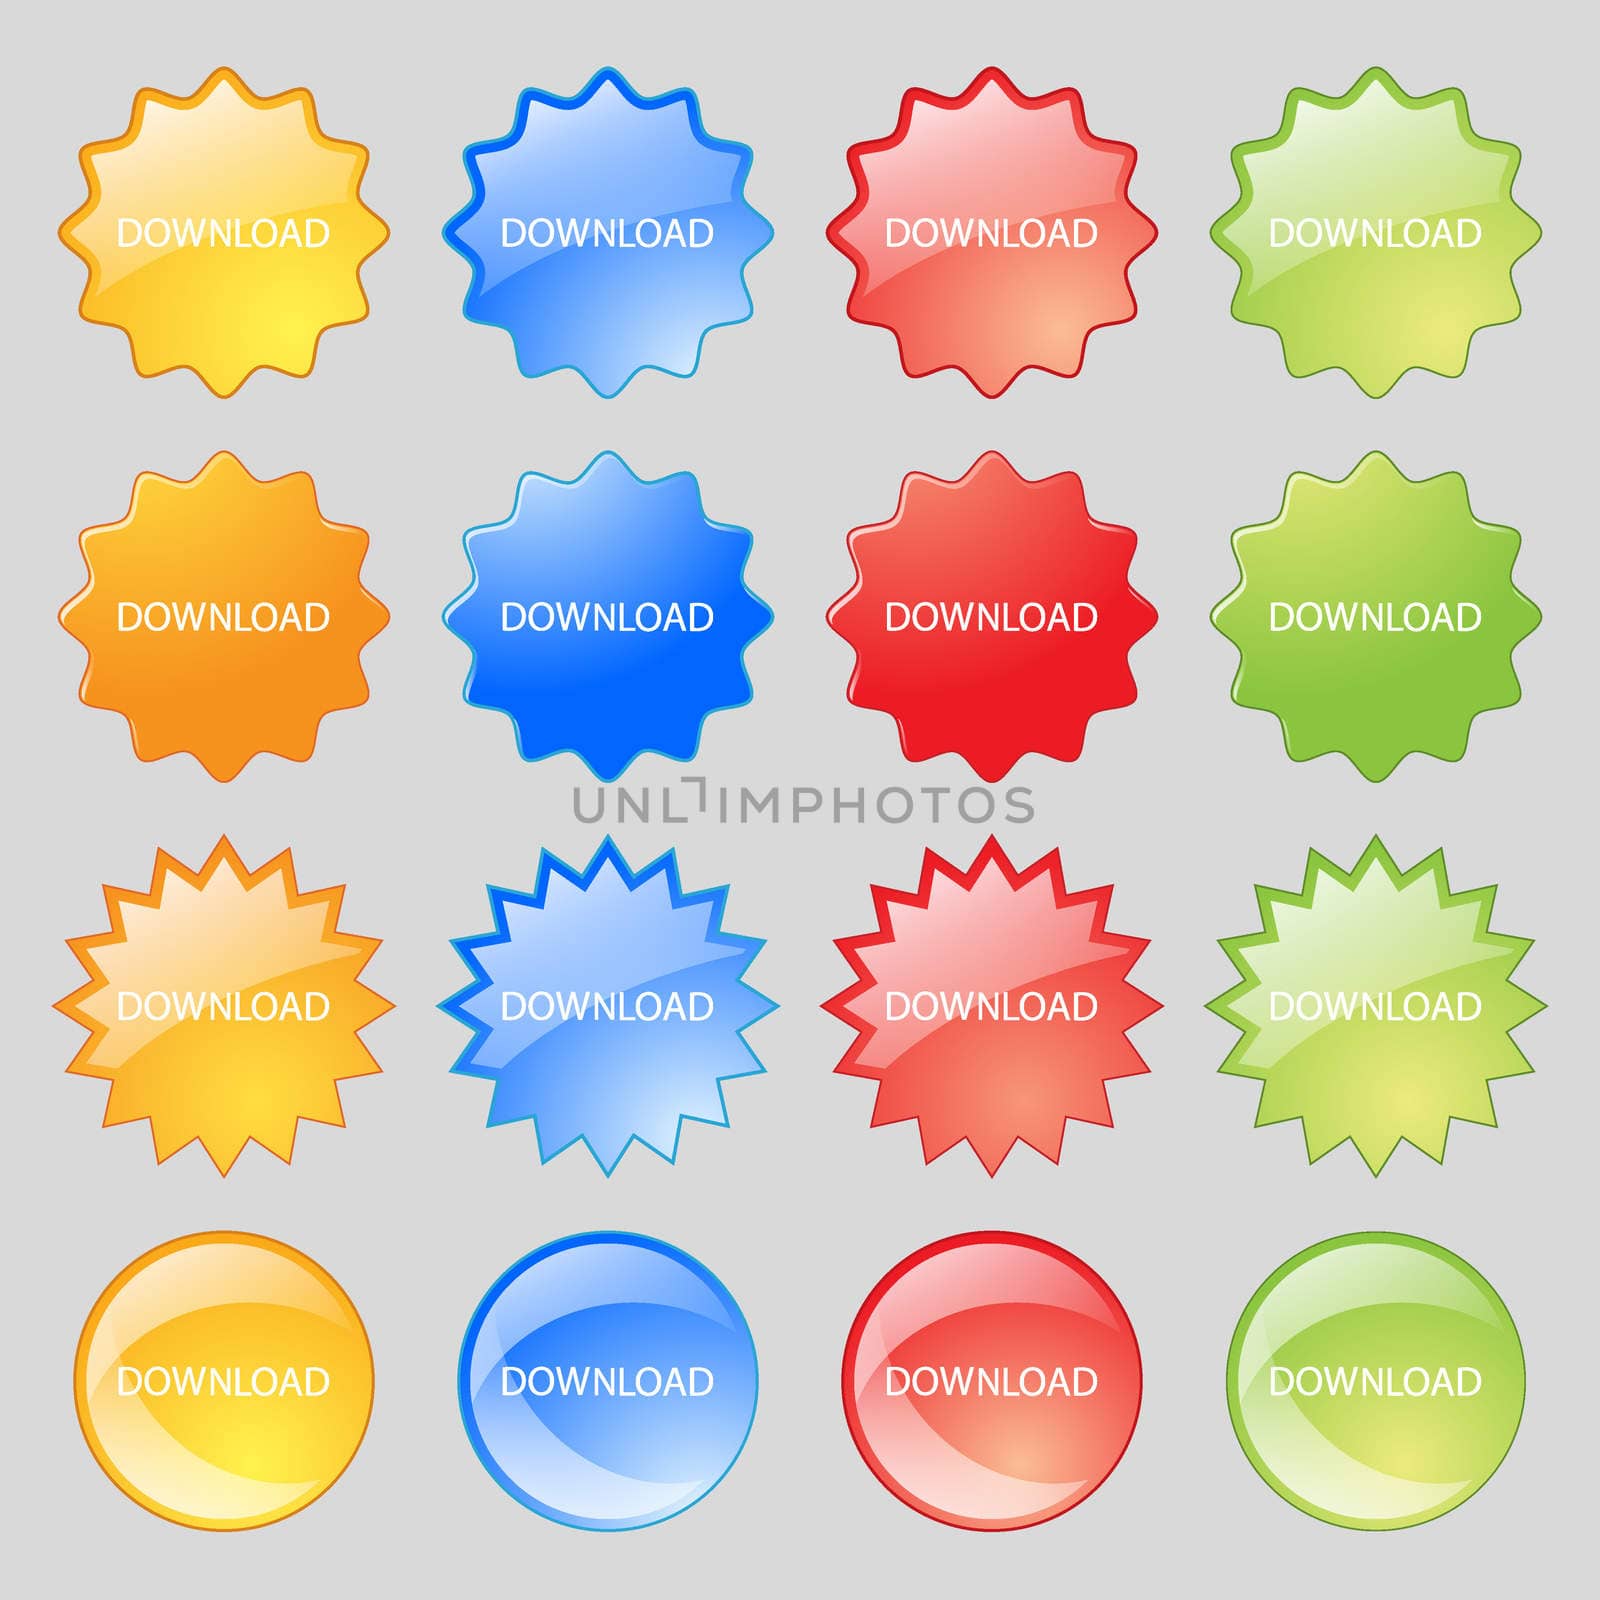 Download icon. Upload button. Load symbol. Big set of 16 colorful modern buttons for your design. illustration